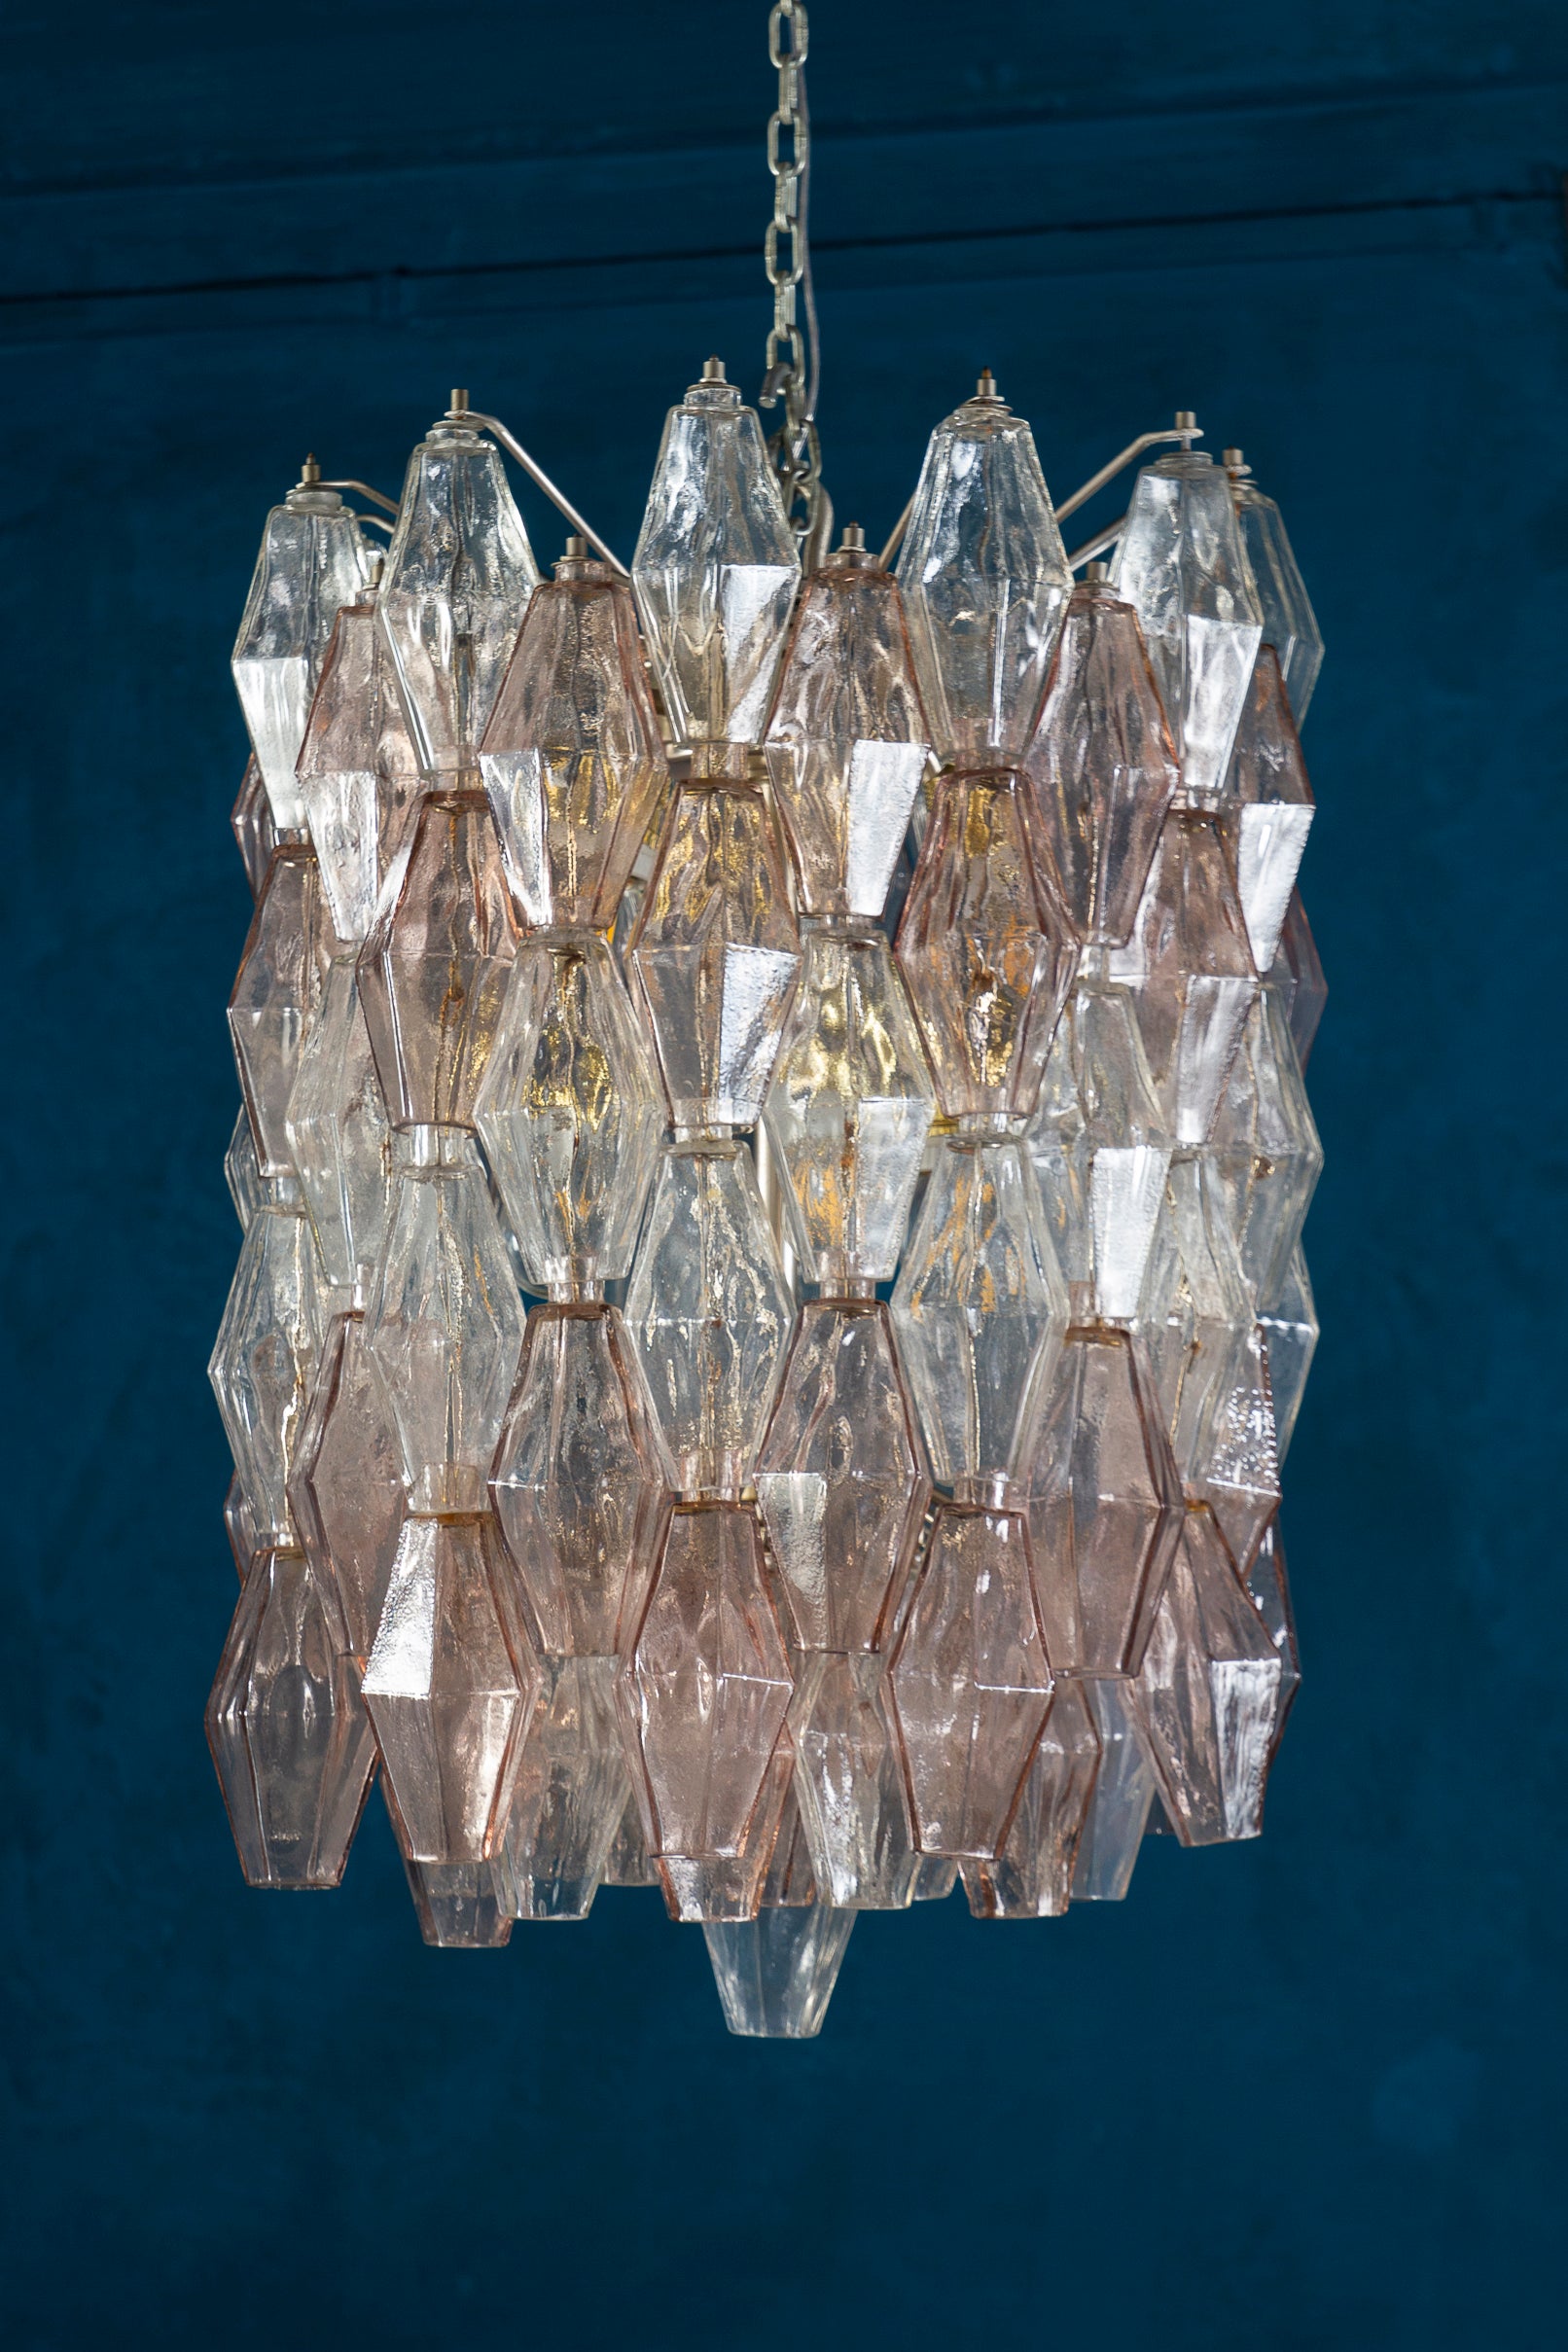 Fabulous original Venini Poliedri chandelier by Carlo Scarpa. Rare combination of light pink and Ice colored Murano glass.
Chrome frame in very good original condition.
 Available also a pair and a pair of sconces.
 